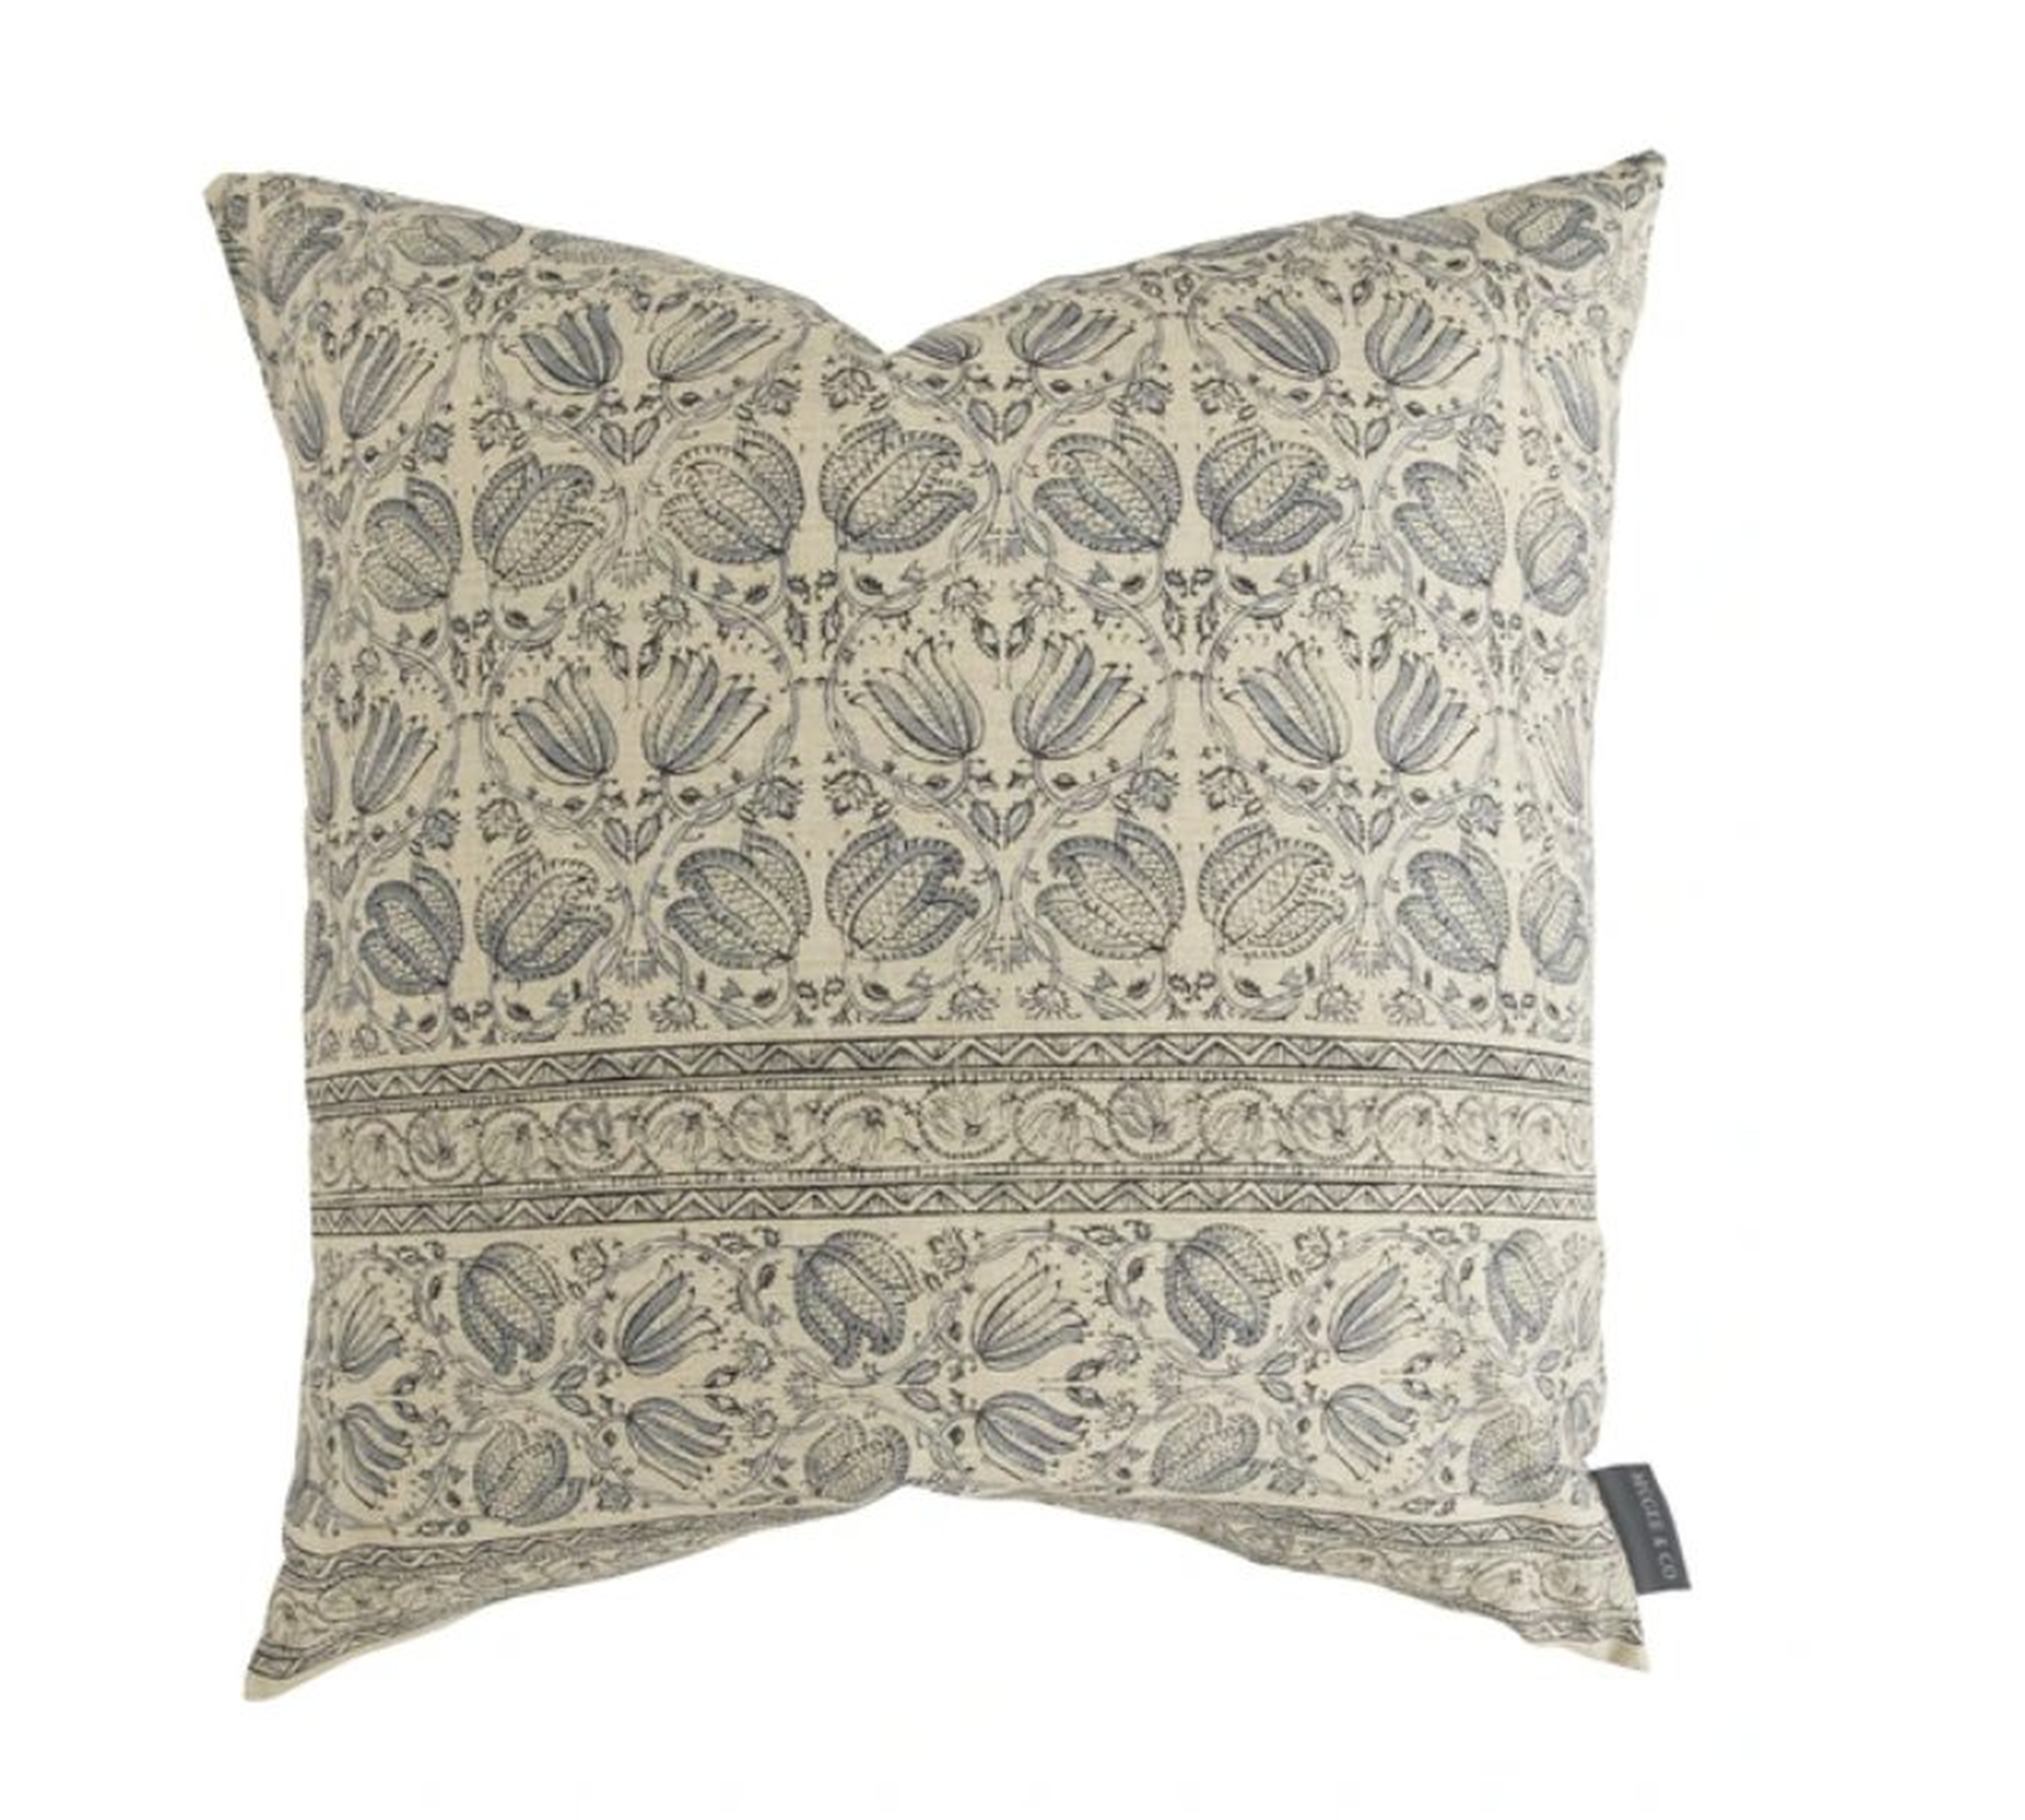 Danny Floral Print Pillow Cover, 24" x 24" - McGee & Co.